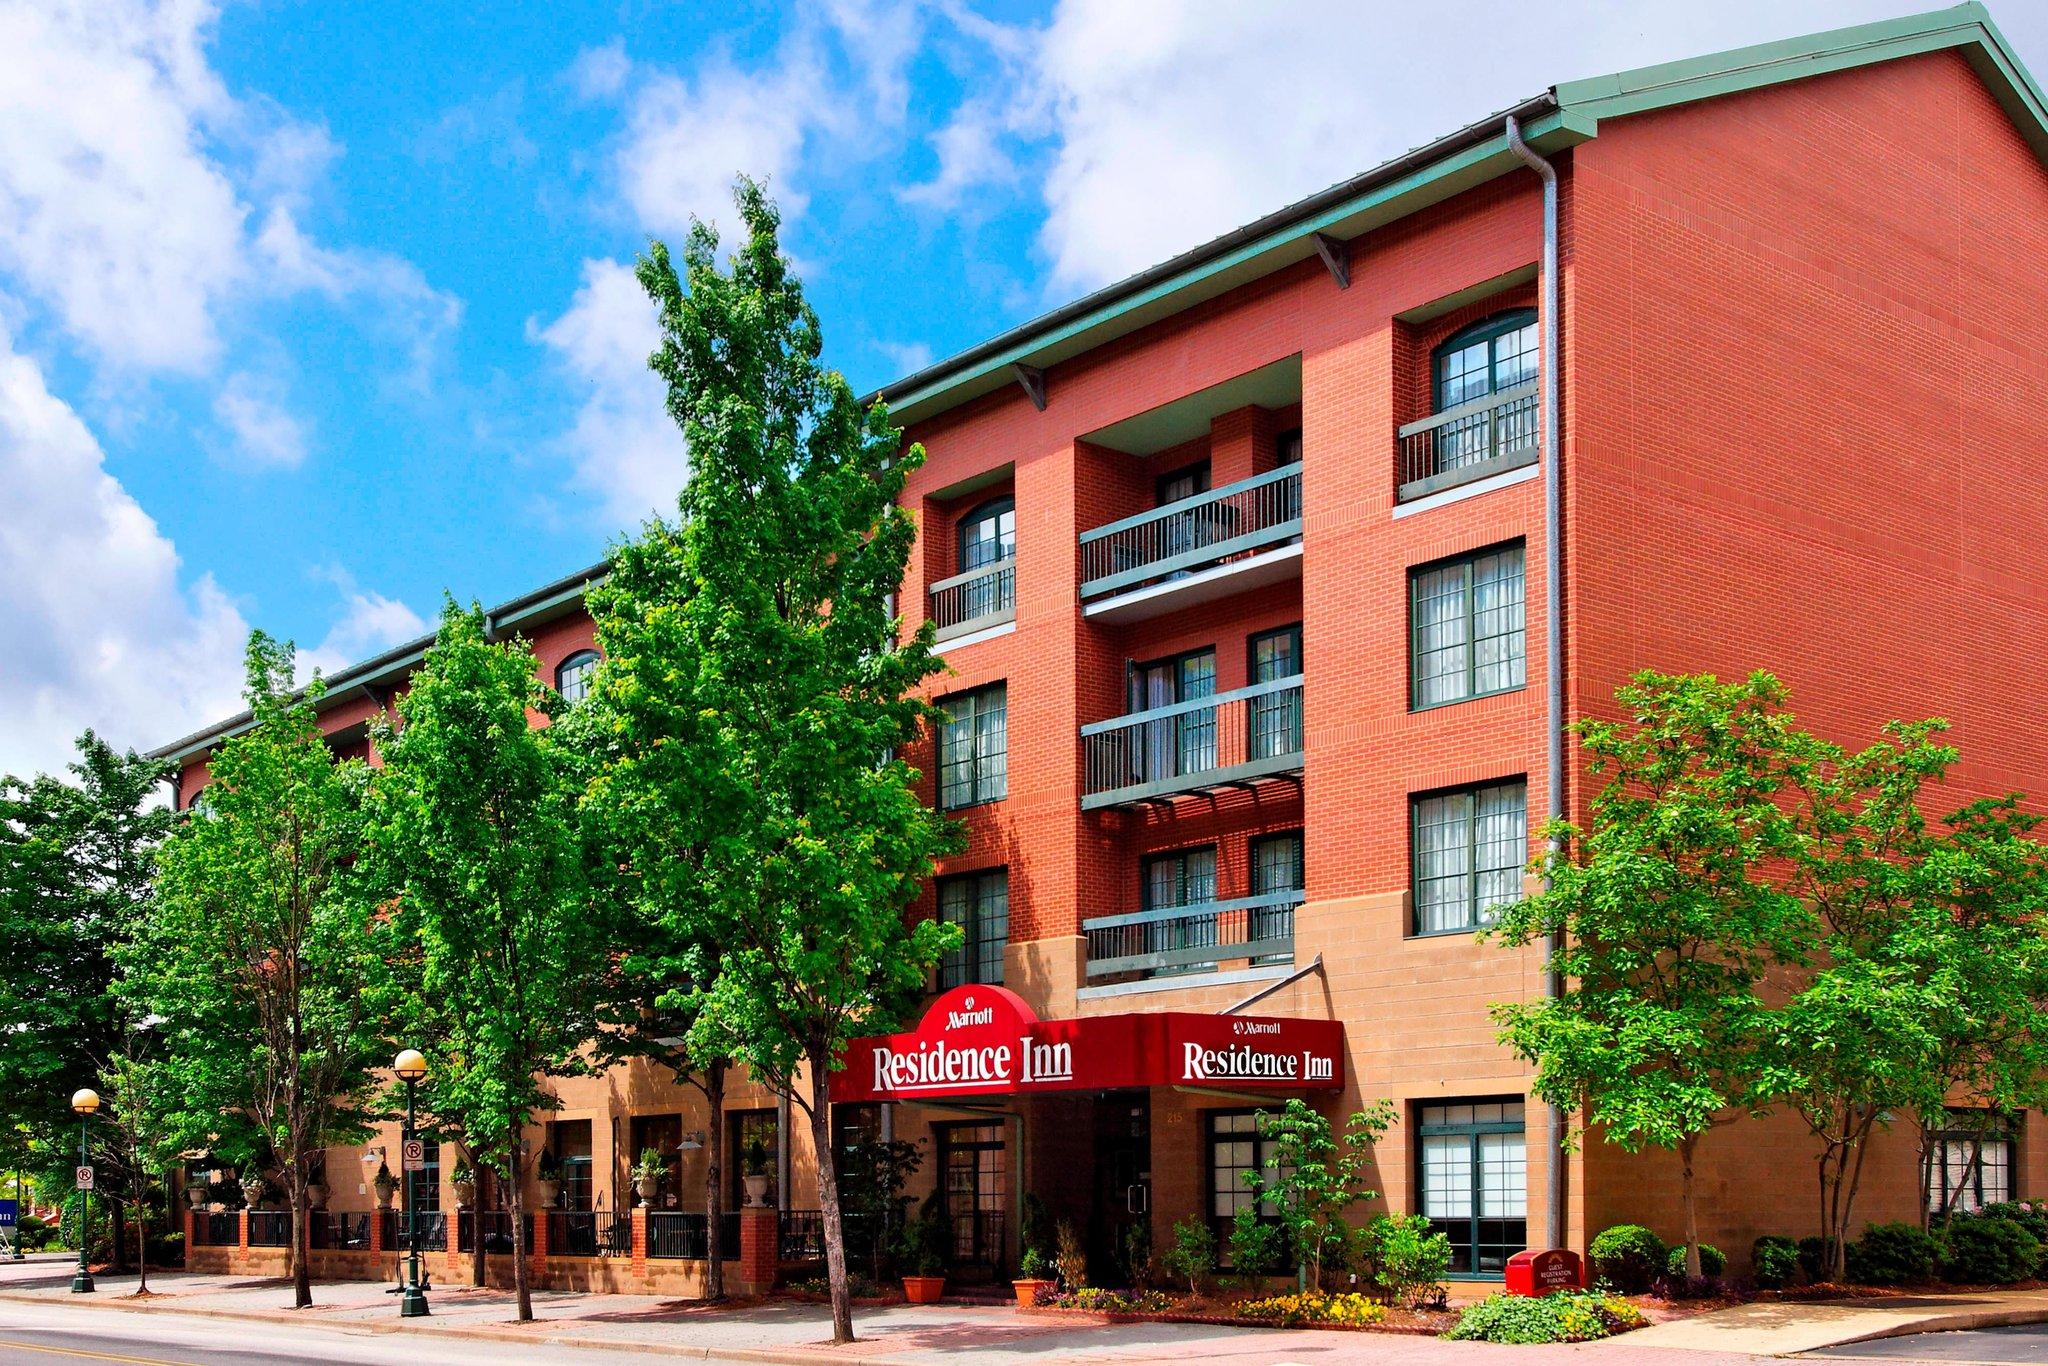 Residence Inn Chattanooga Downtown in Chattanooga, TN